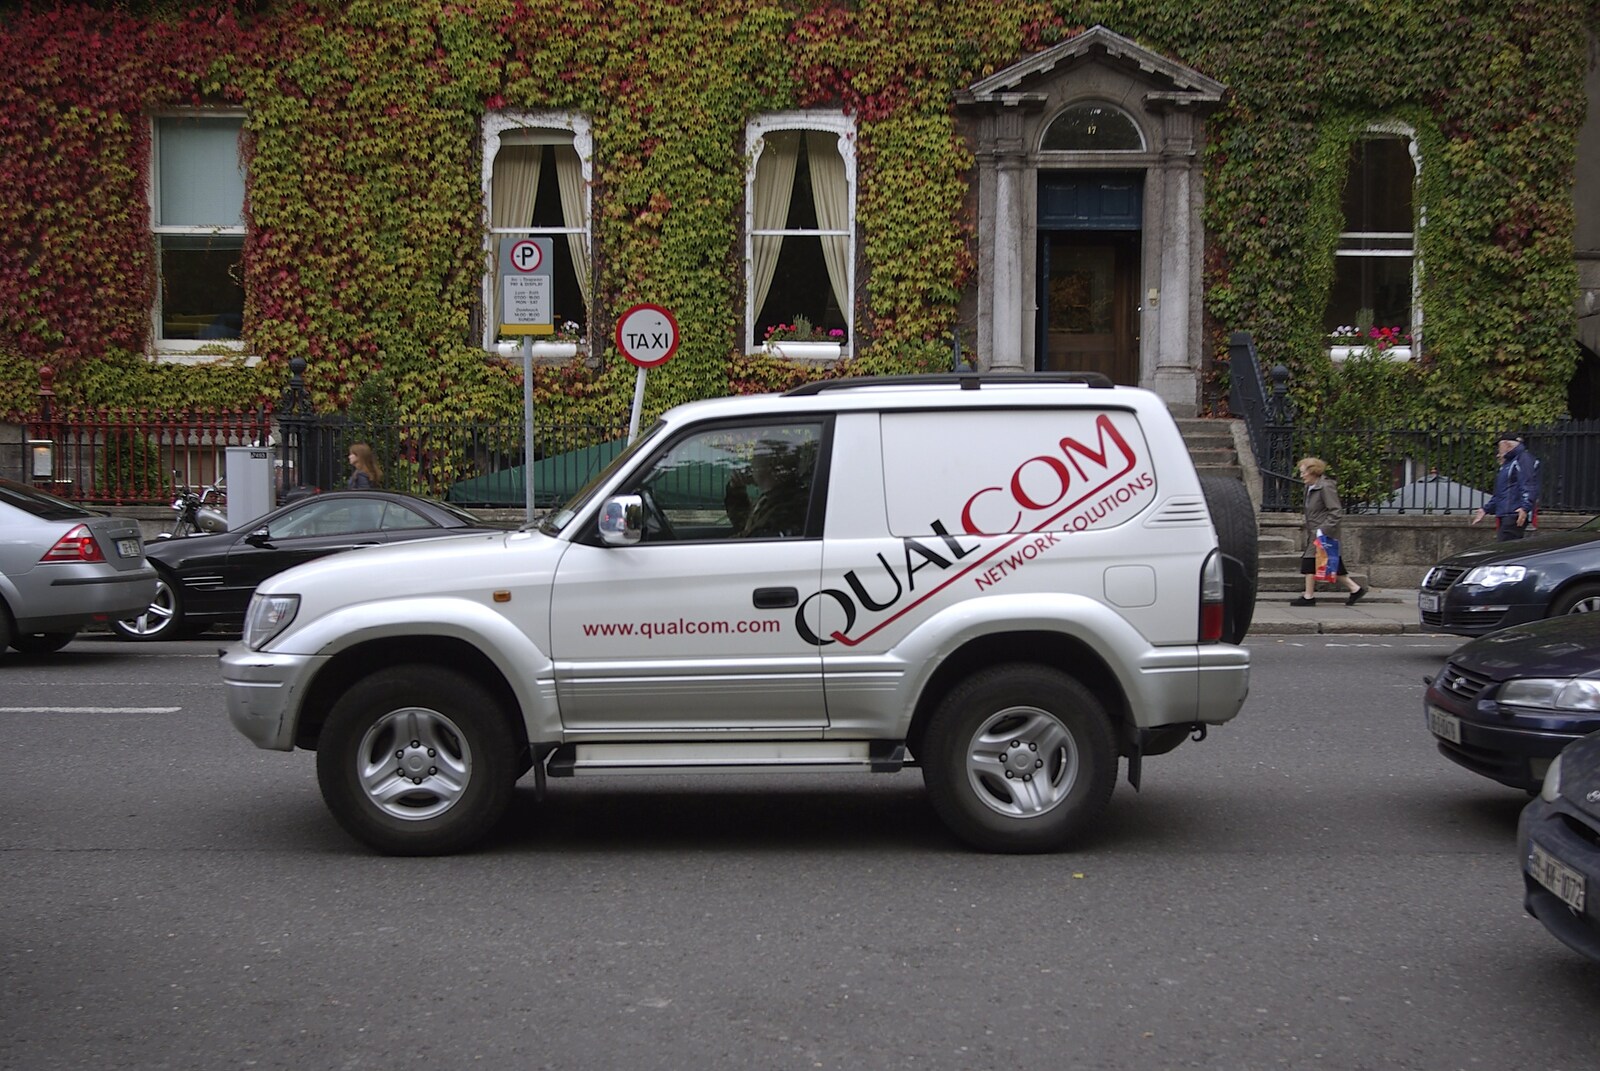 Blackrock and Dublin, Ireland - 24th September 2007: A van belonging to 'the other Qualcom' is spotted